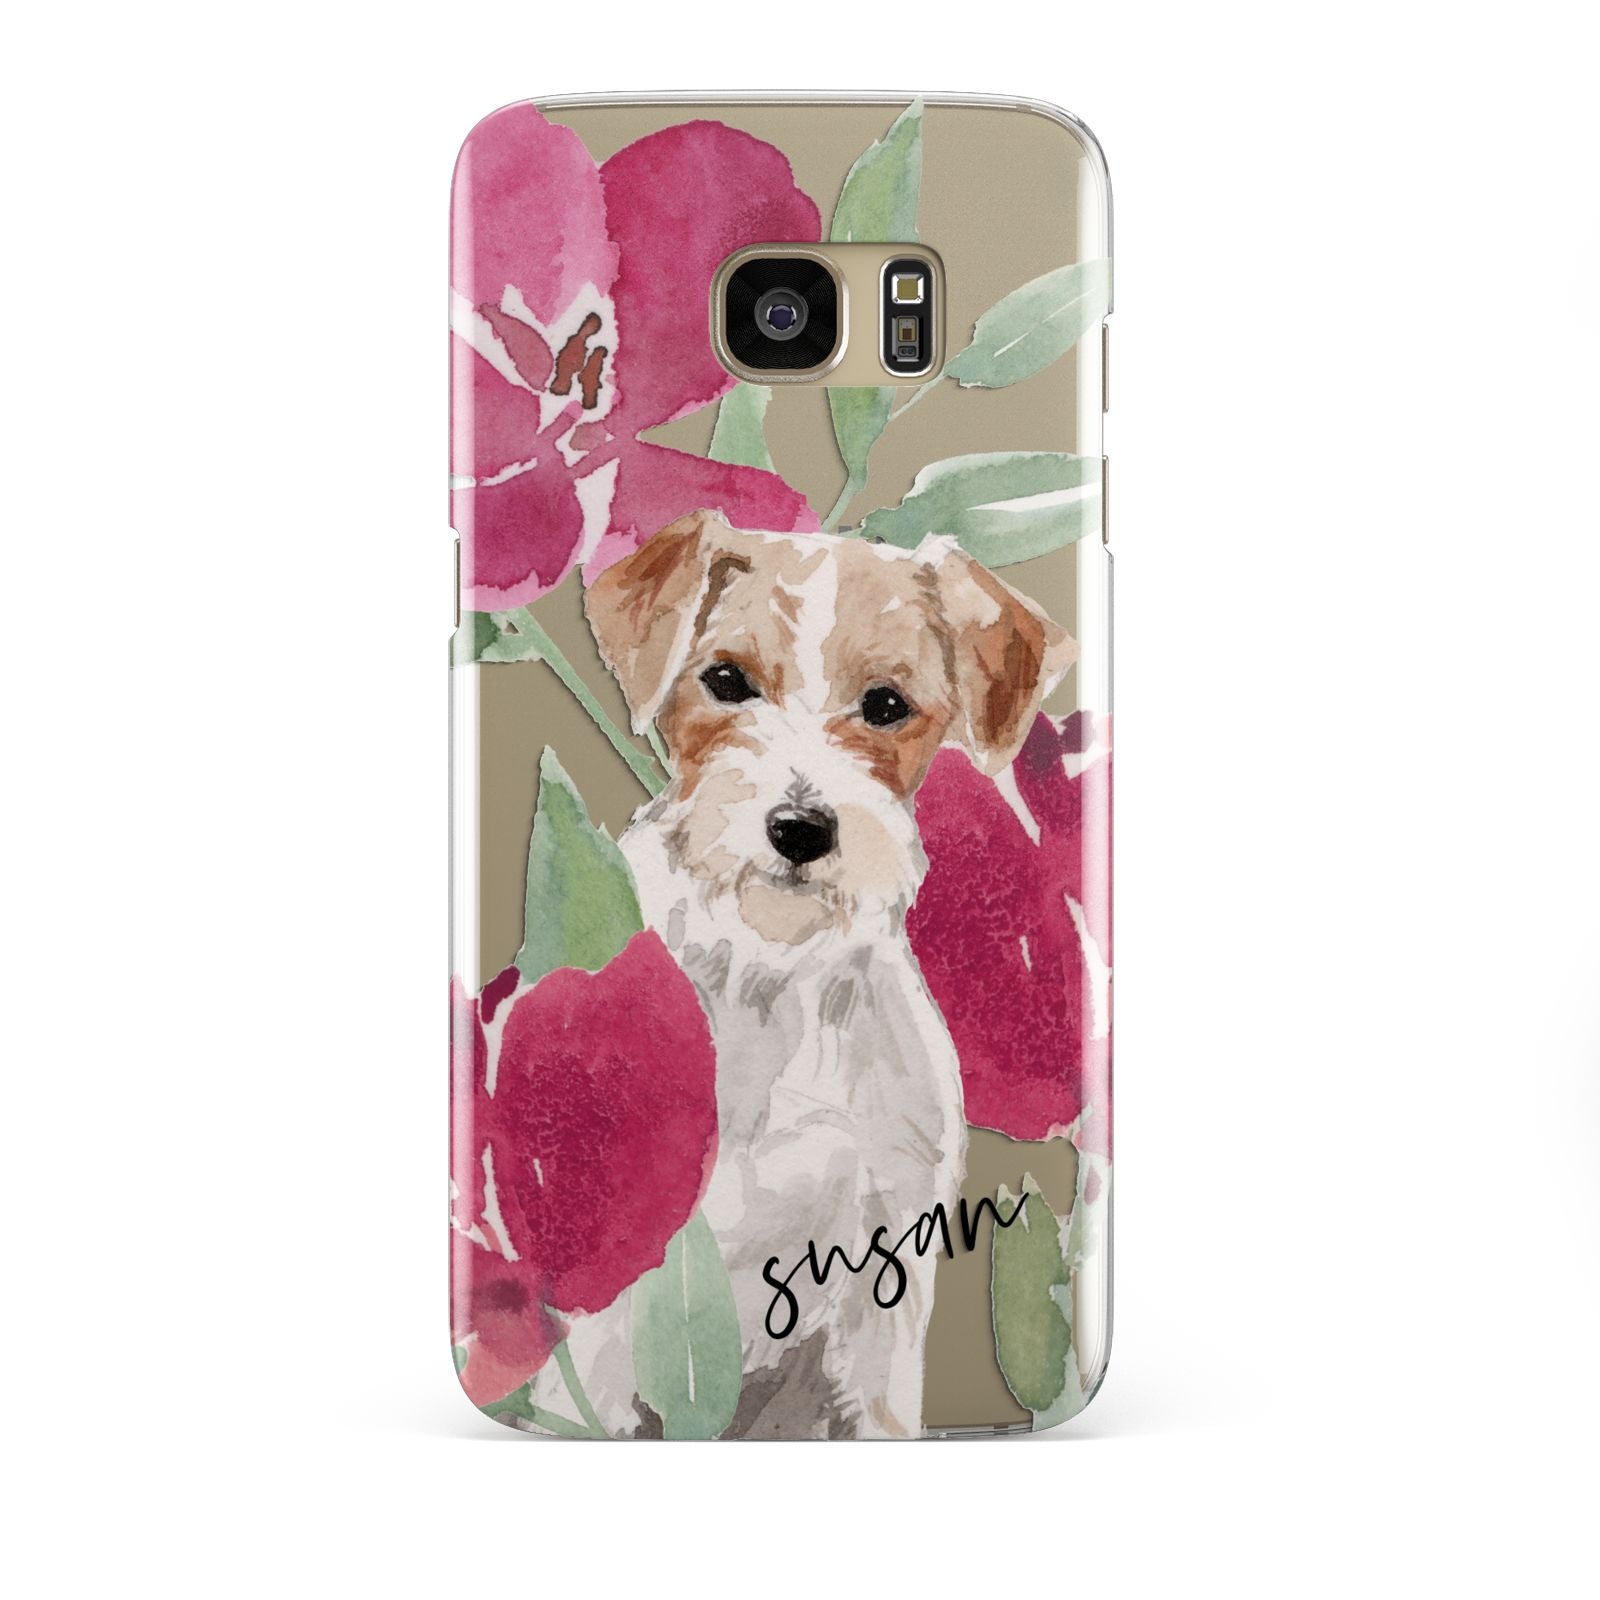 Personalised Jack Russel Samsung Galaxy S7 Edge Case